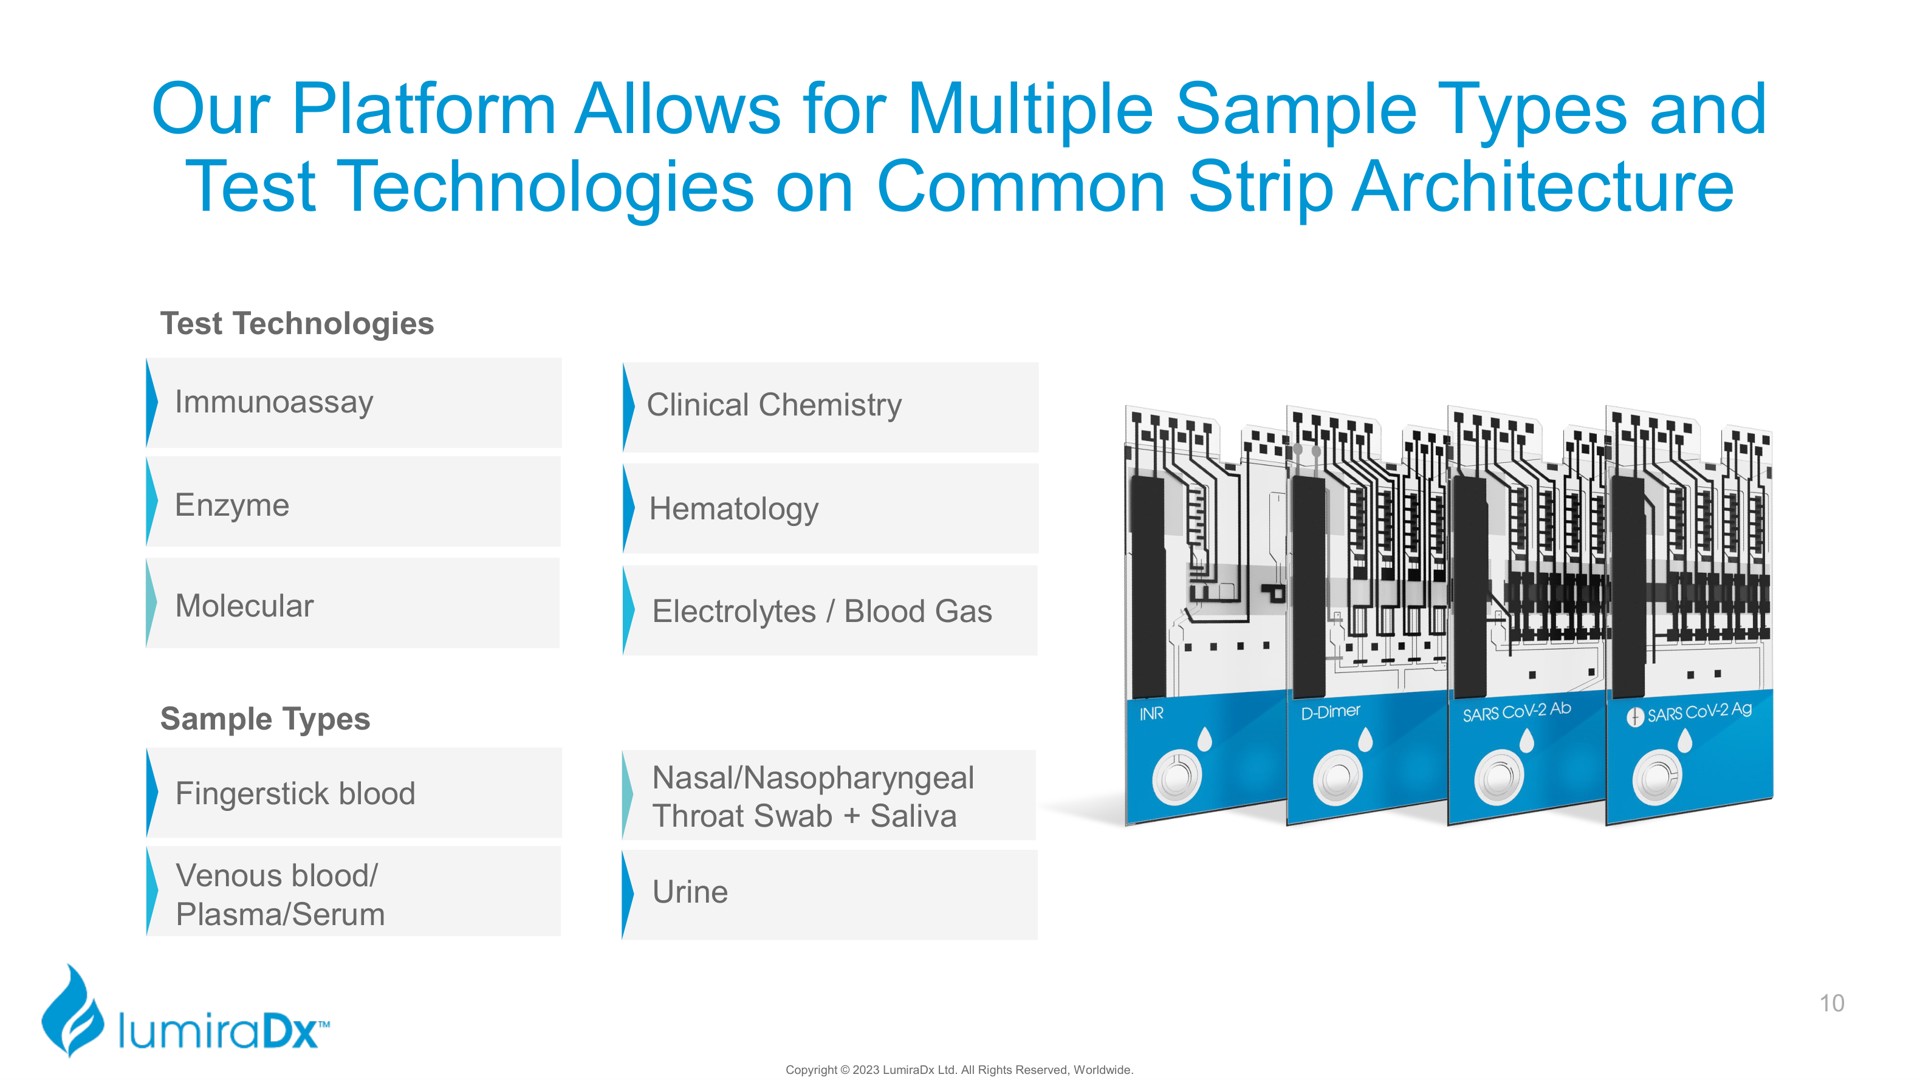 our platform allows for multiple sample types and test technologies on common strip architecture | LumiraDx